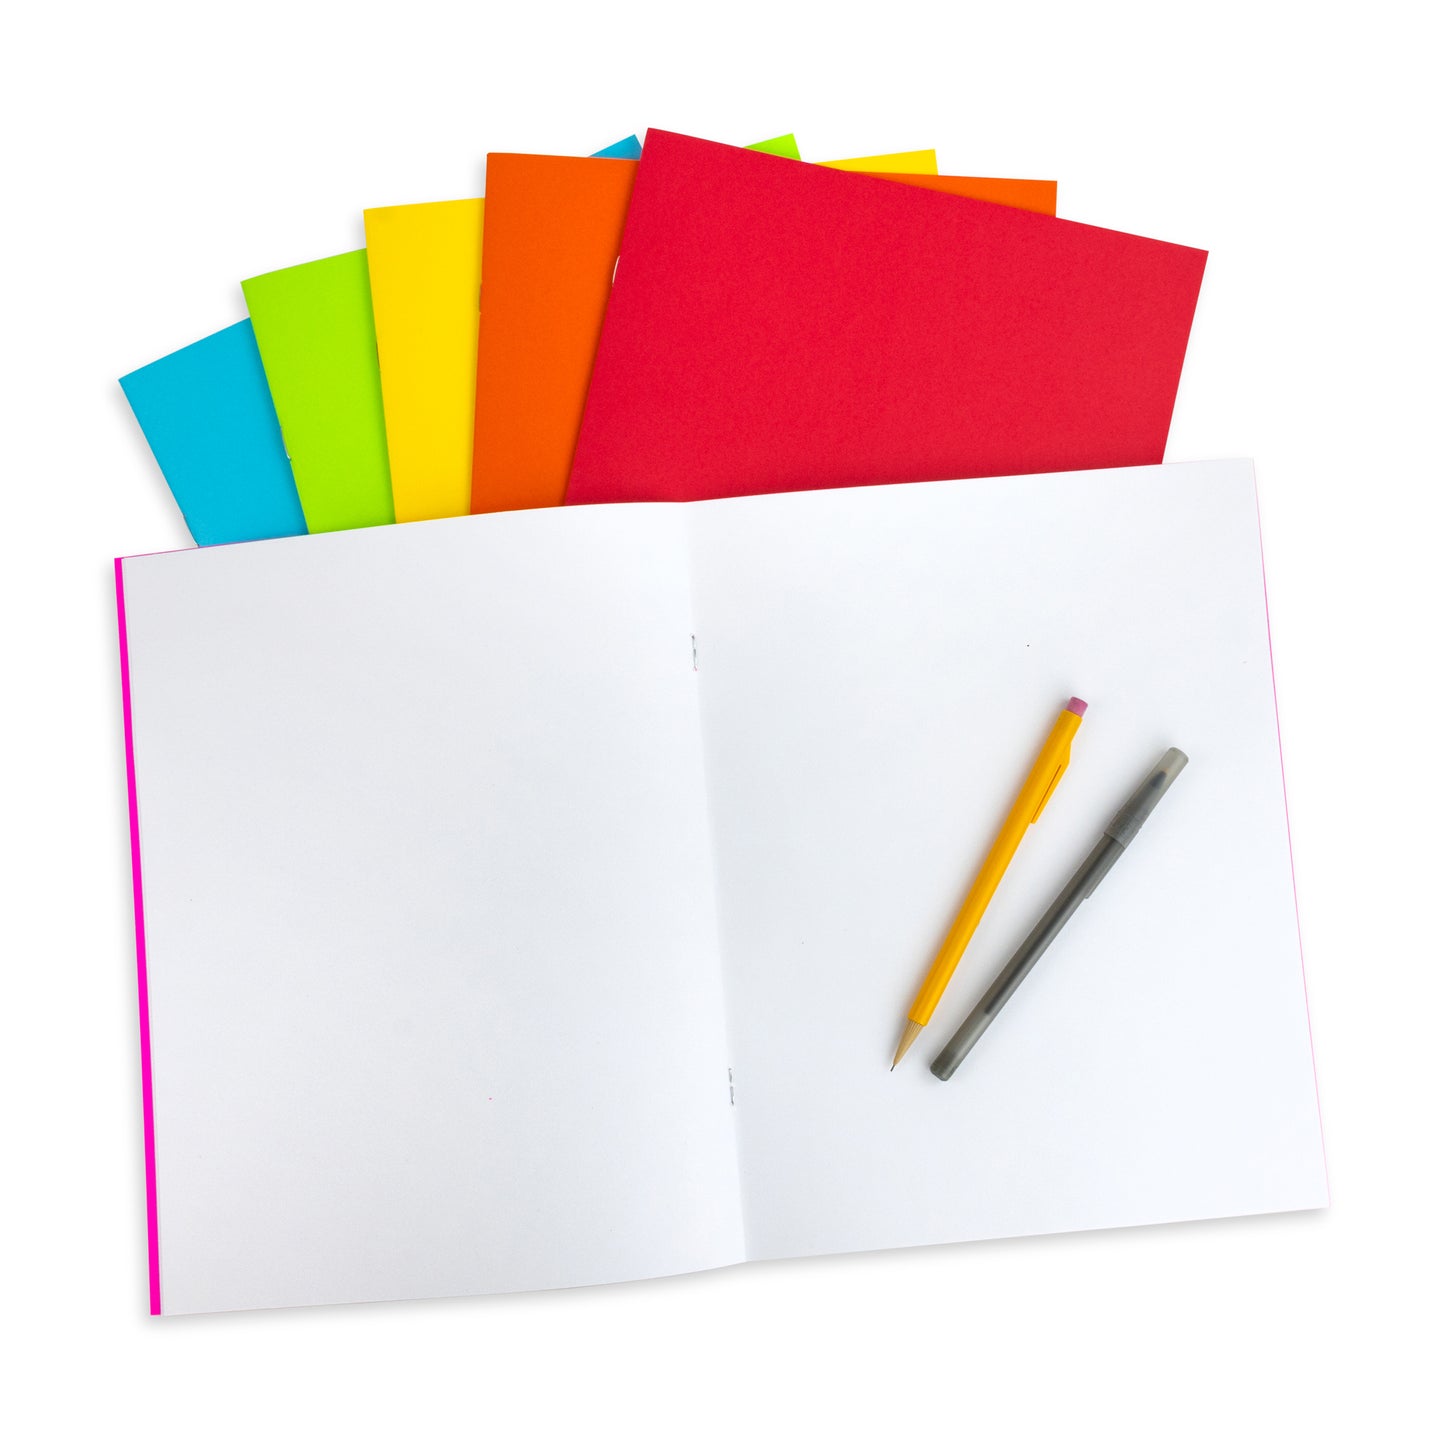 Bright Blank Books, 24 Pages, Assorted Colors, 8.5" x 11", 6 Per Pack, 2 Packs